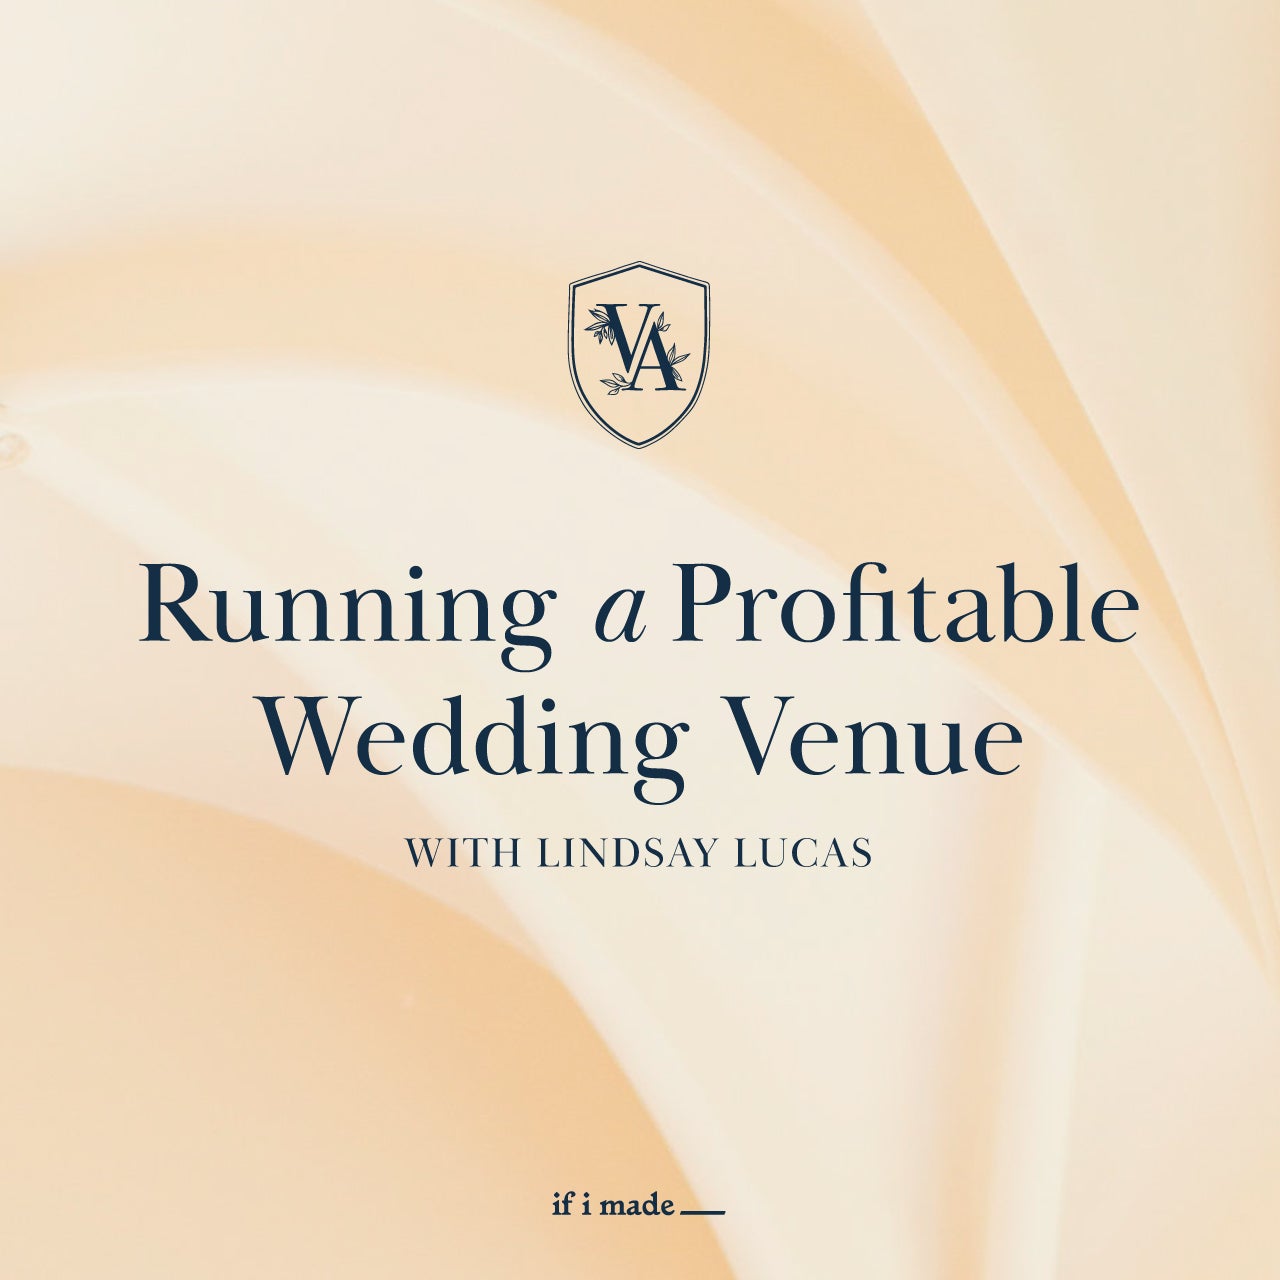 Running a Profitable Wedding Venue with Lindsay Lucas (SPP0522) - 14 payments of $149